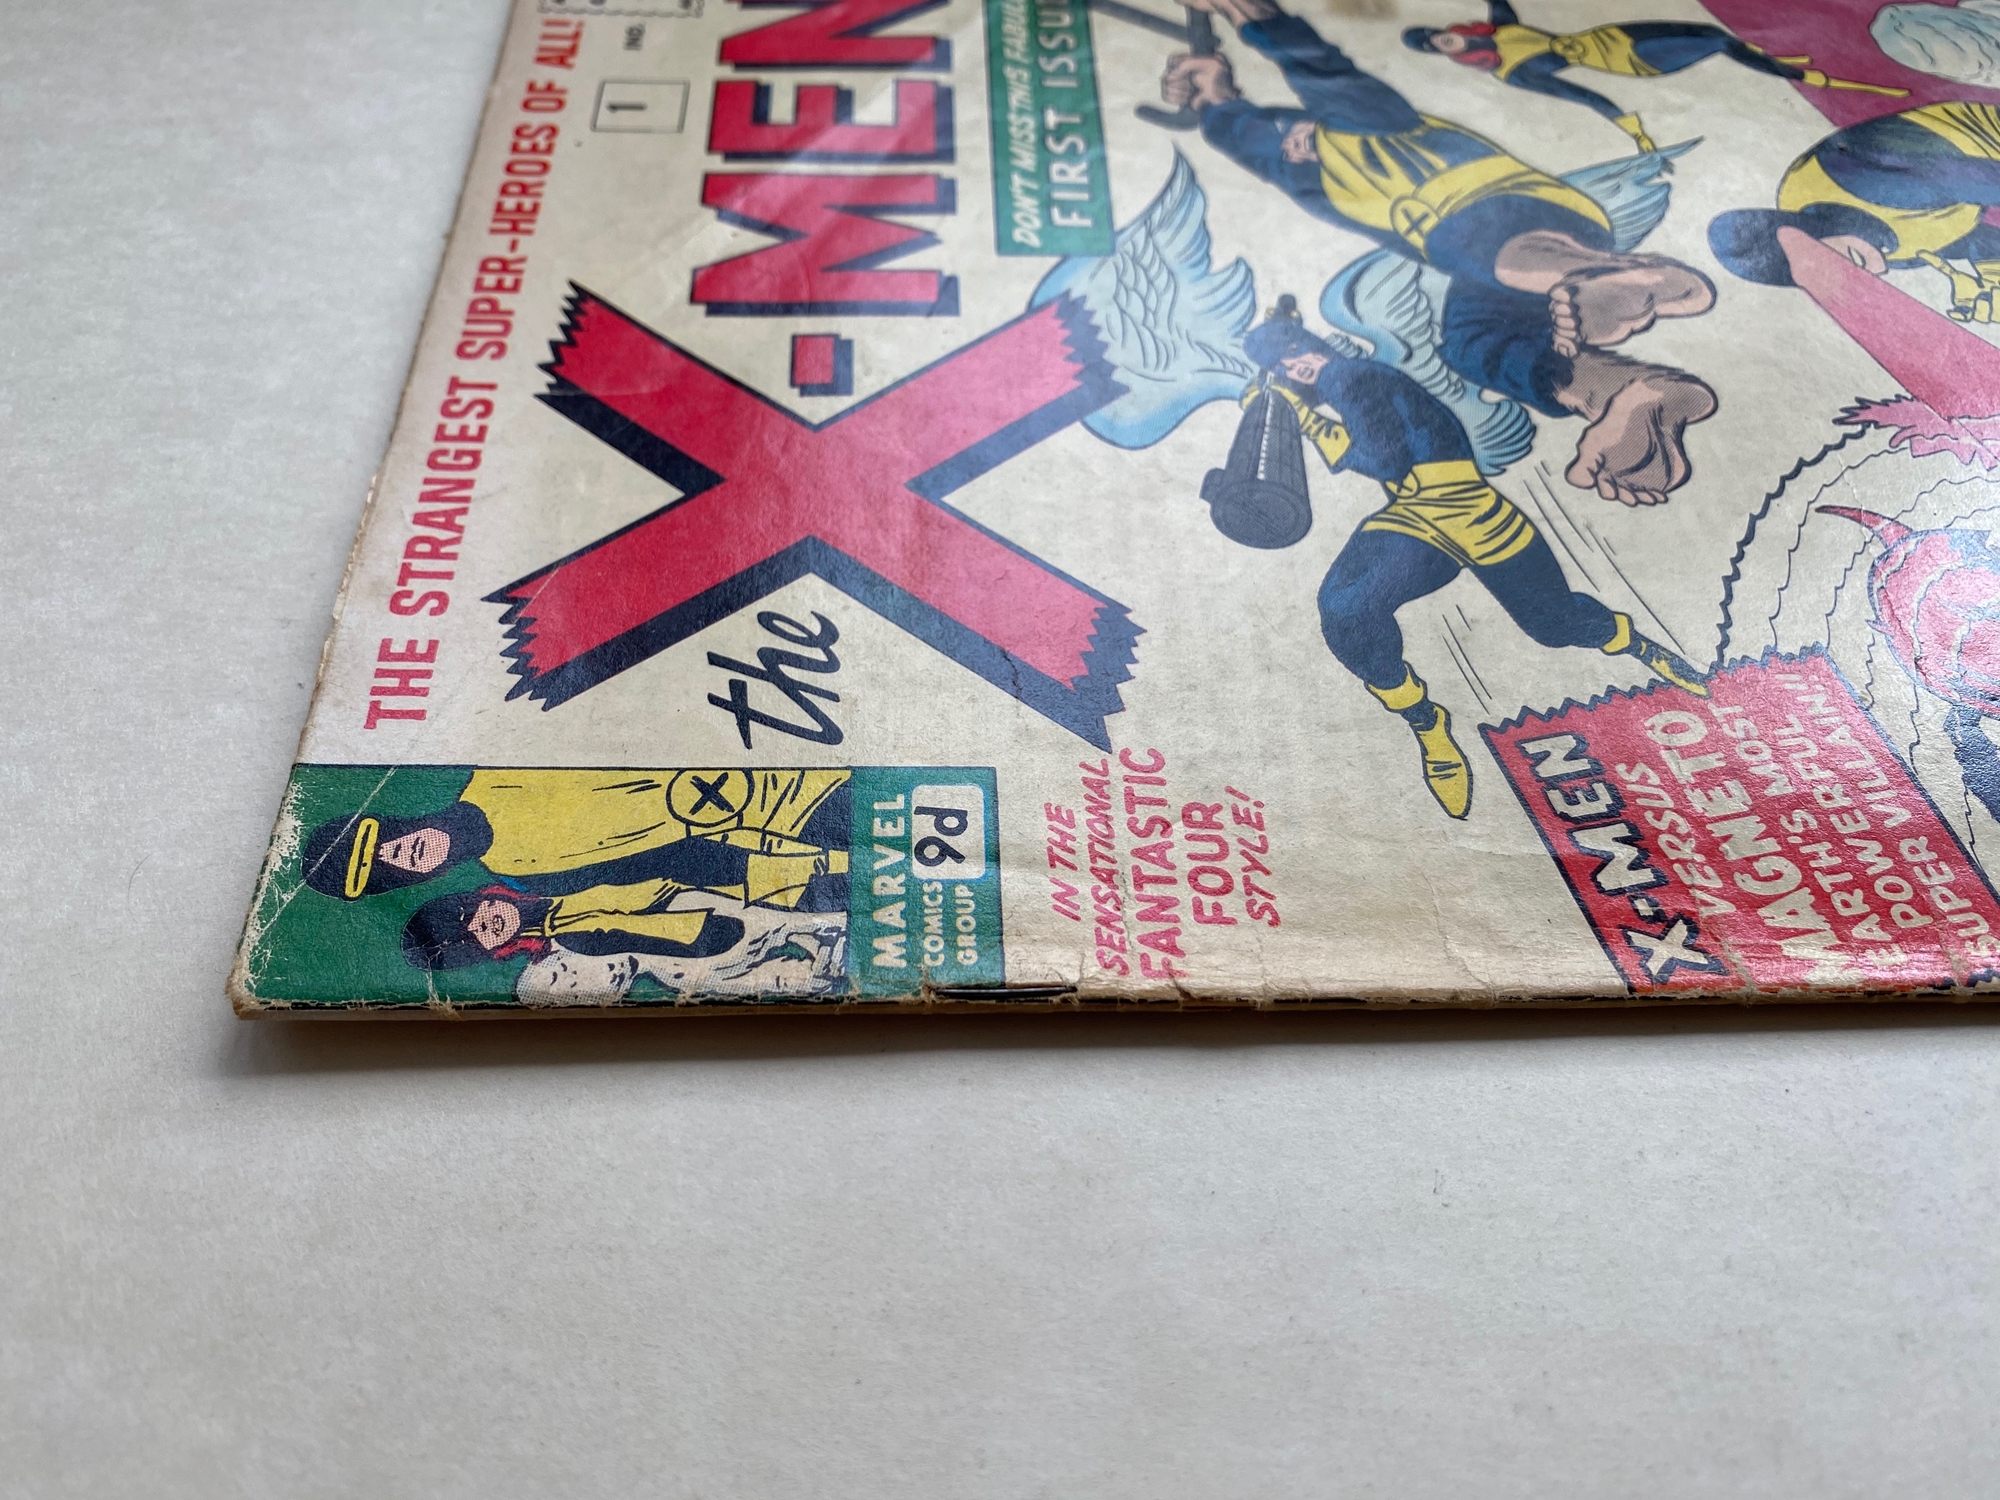 UNCANNY X-MEN #1 - (1963 - MARVEL - Pence Copy) - One of the most important Marvel Silver Age keys - - Image 3 of 9